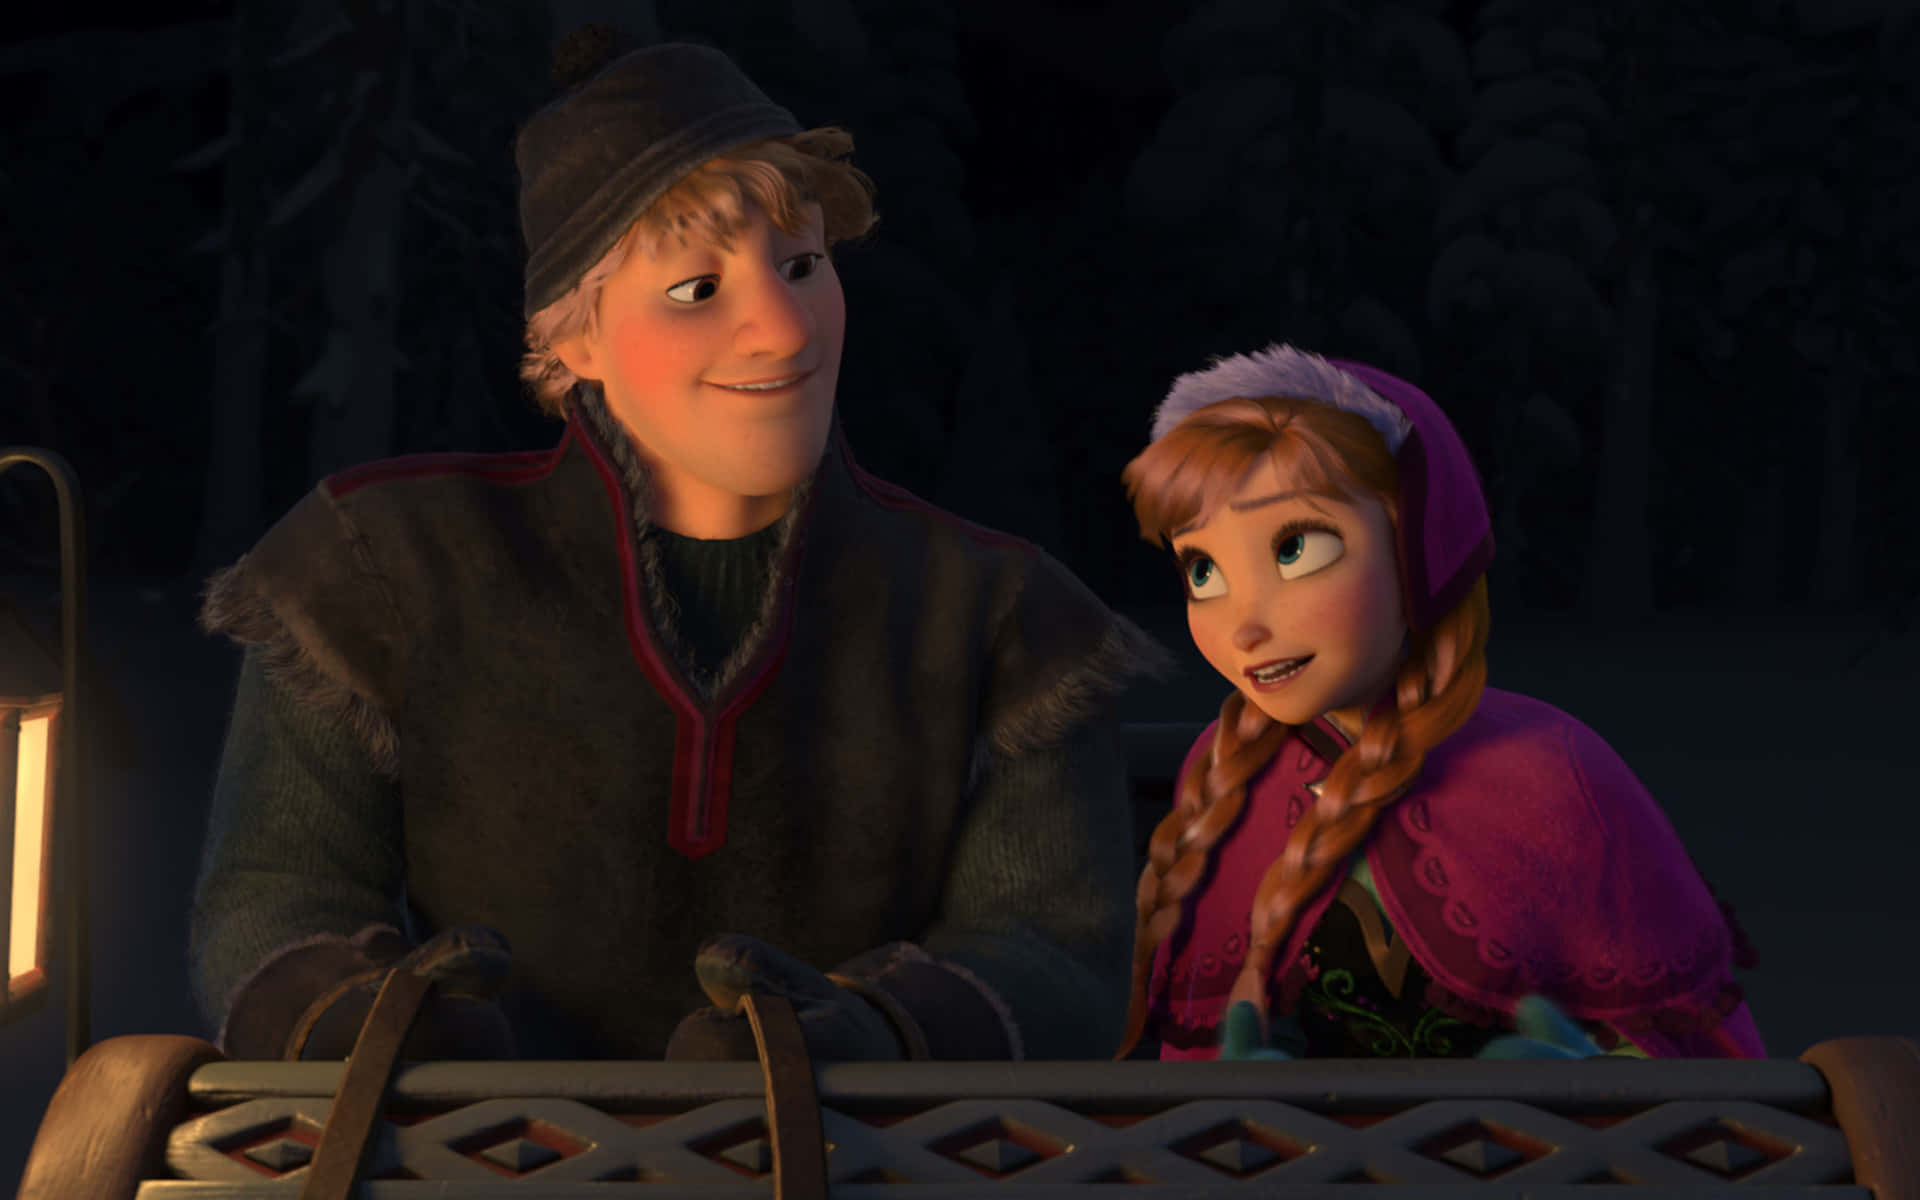 Elsa and Anna of "Frozen" Reunited and Ready to Conquer the World